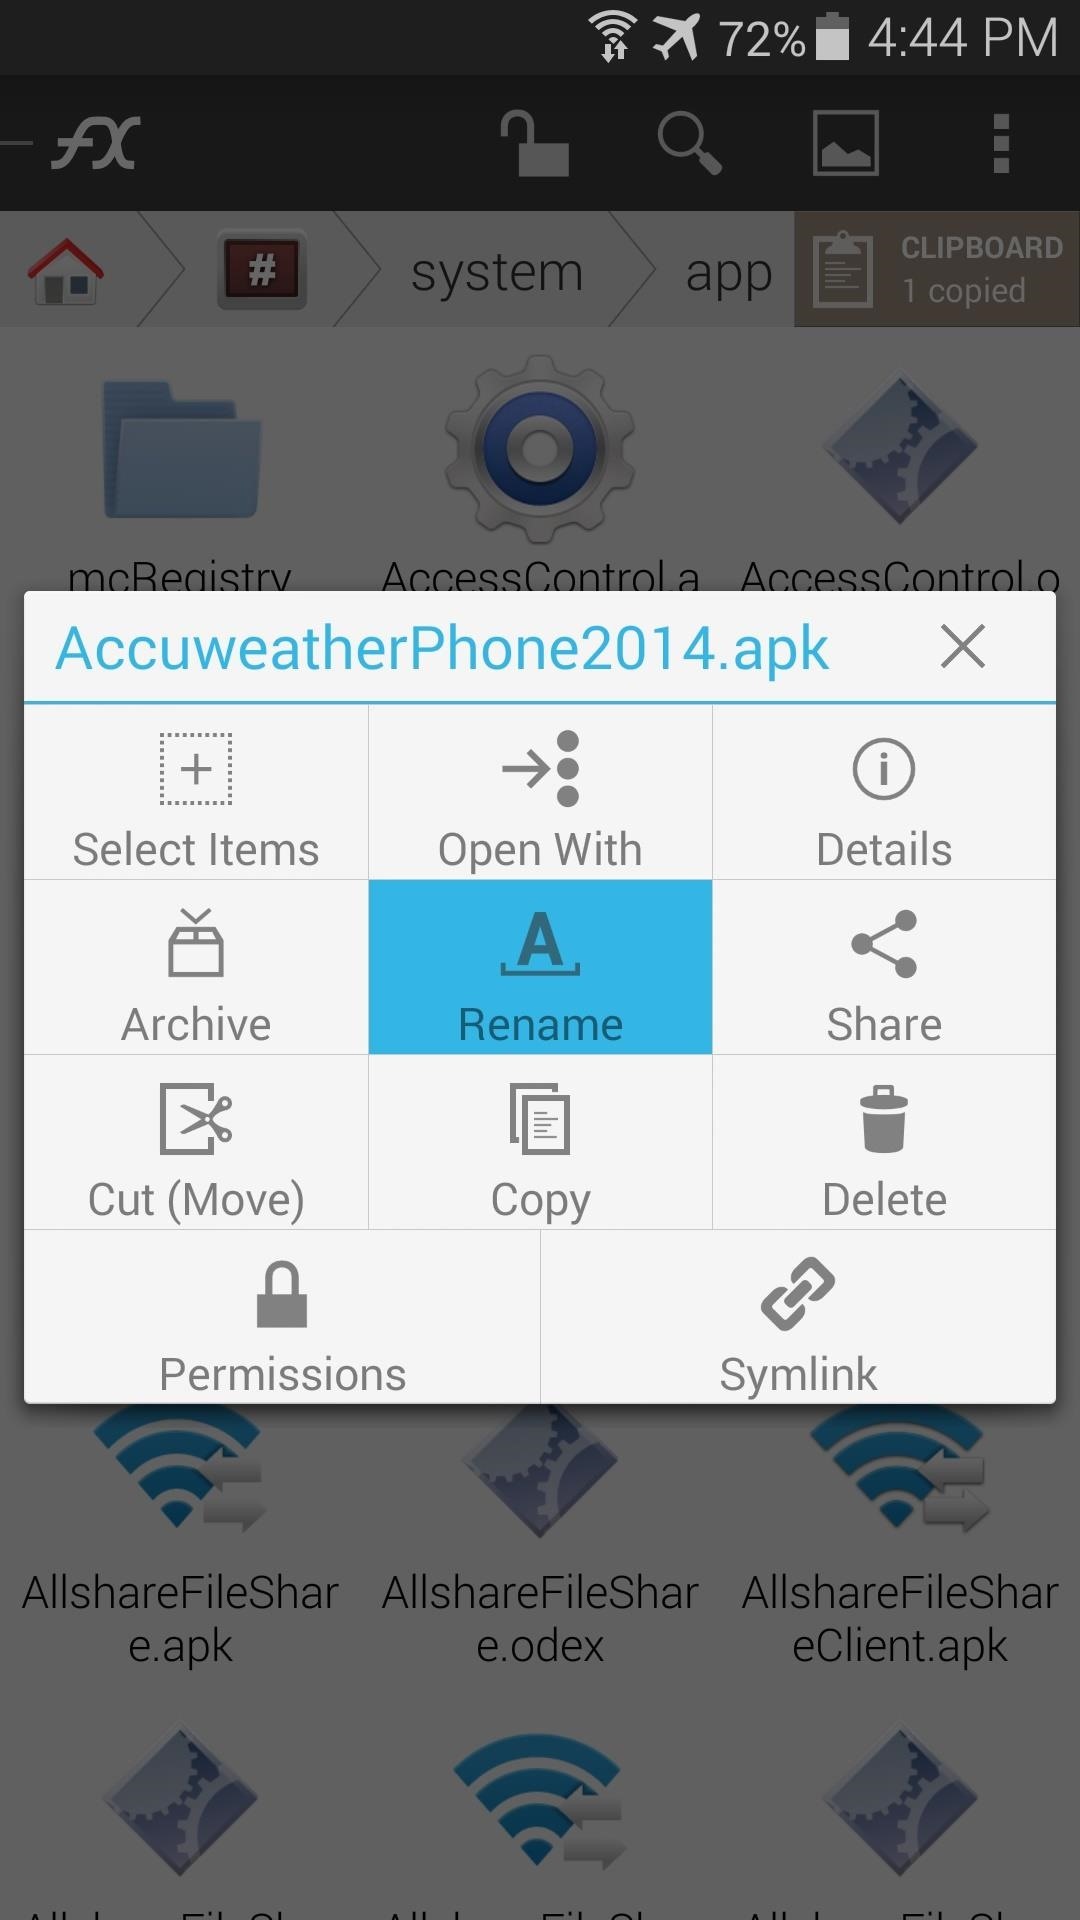 Remove the Grassy Background on Your Galaxy S5’s Stock Weather Widget to See More Wallpaper